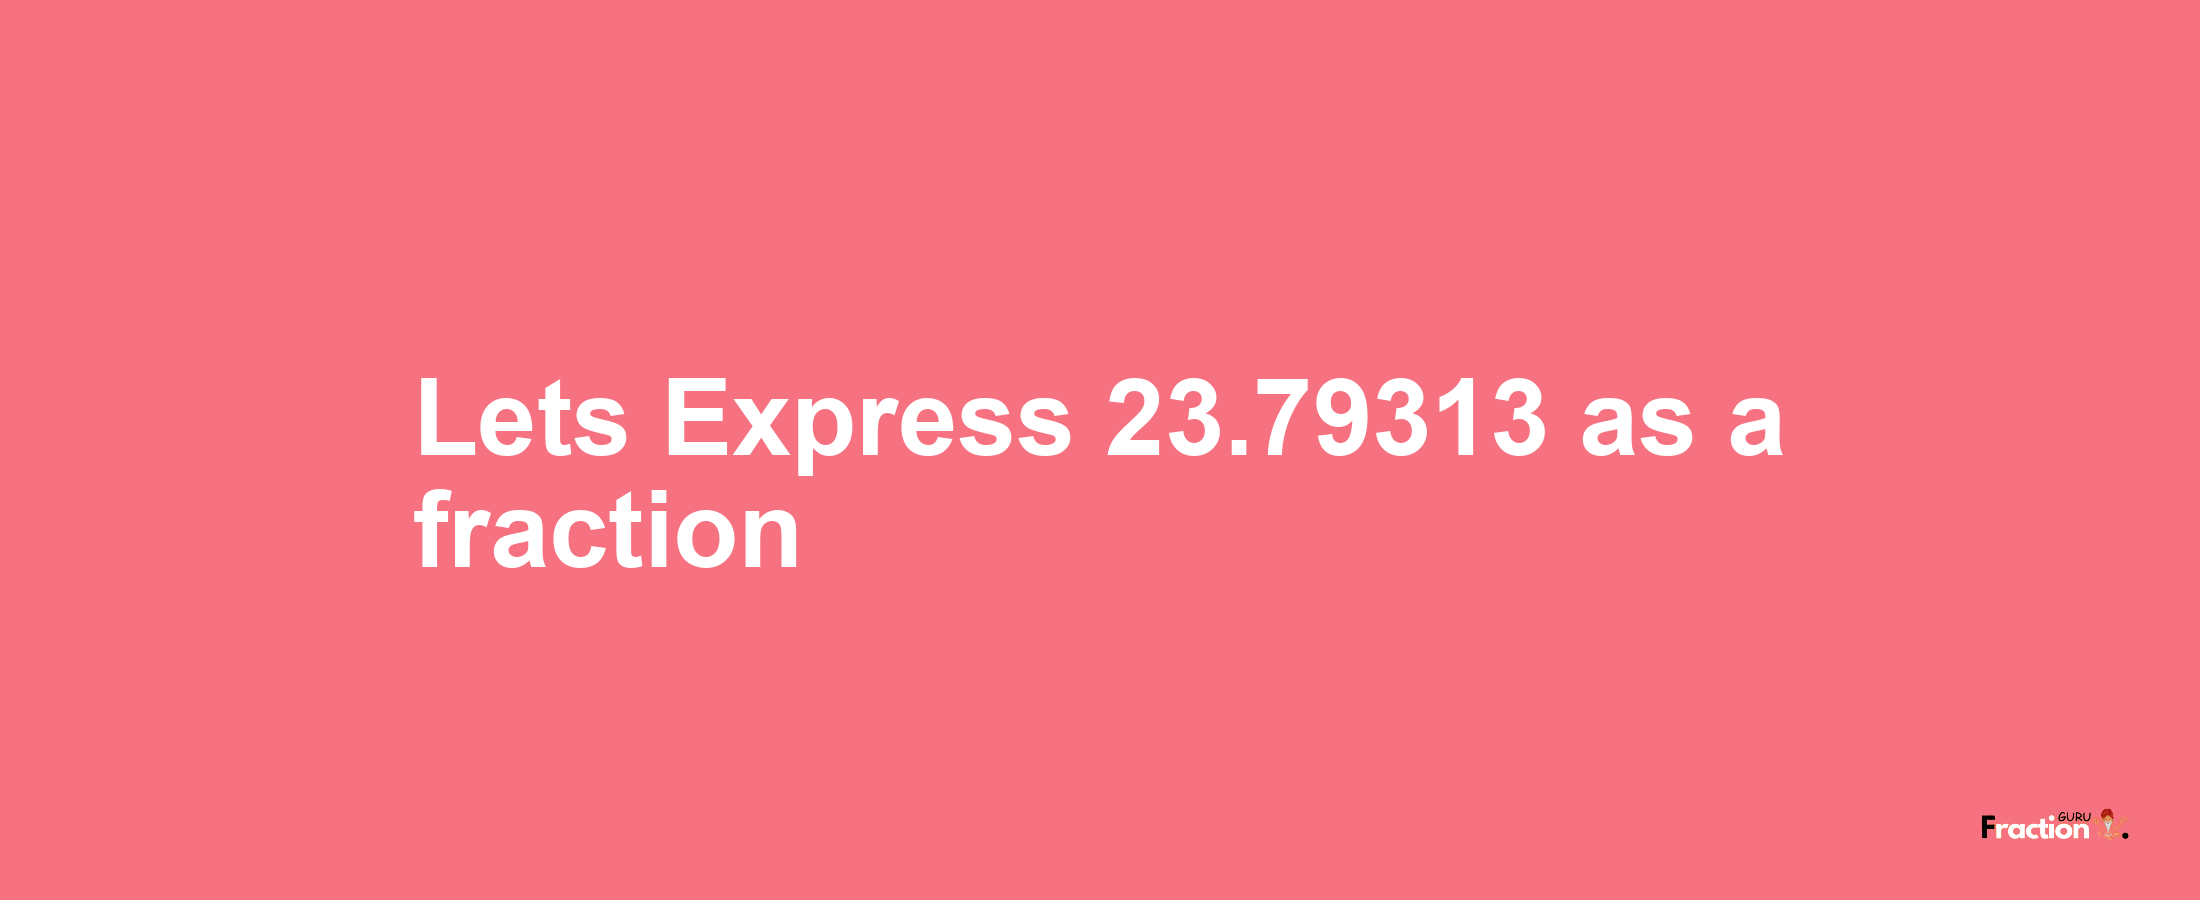 Lets Express 23.79313 as afraction